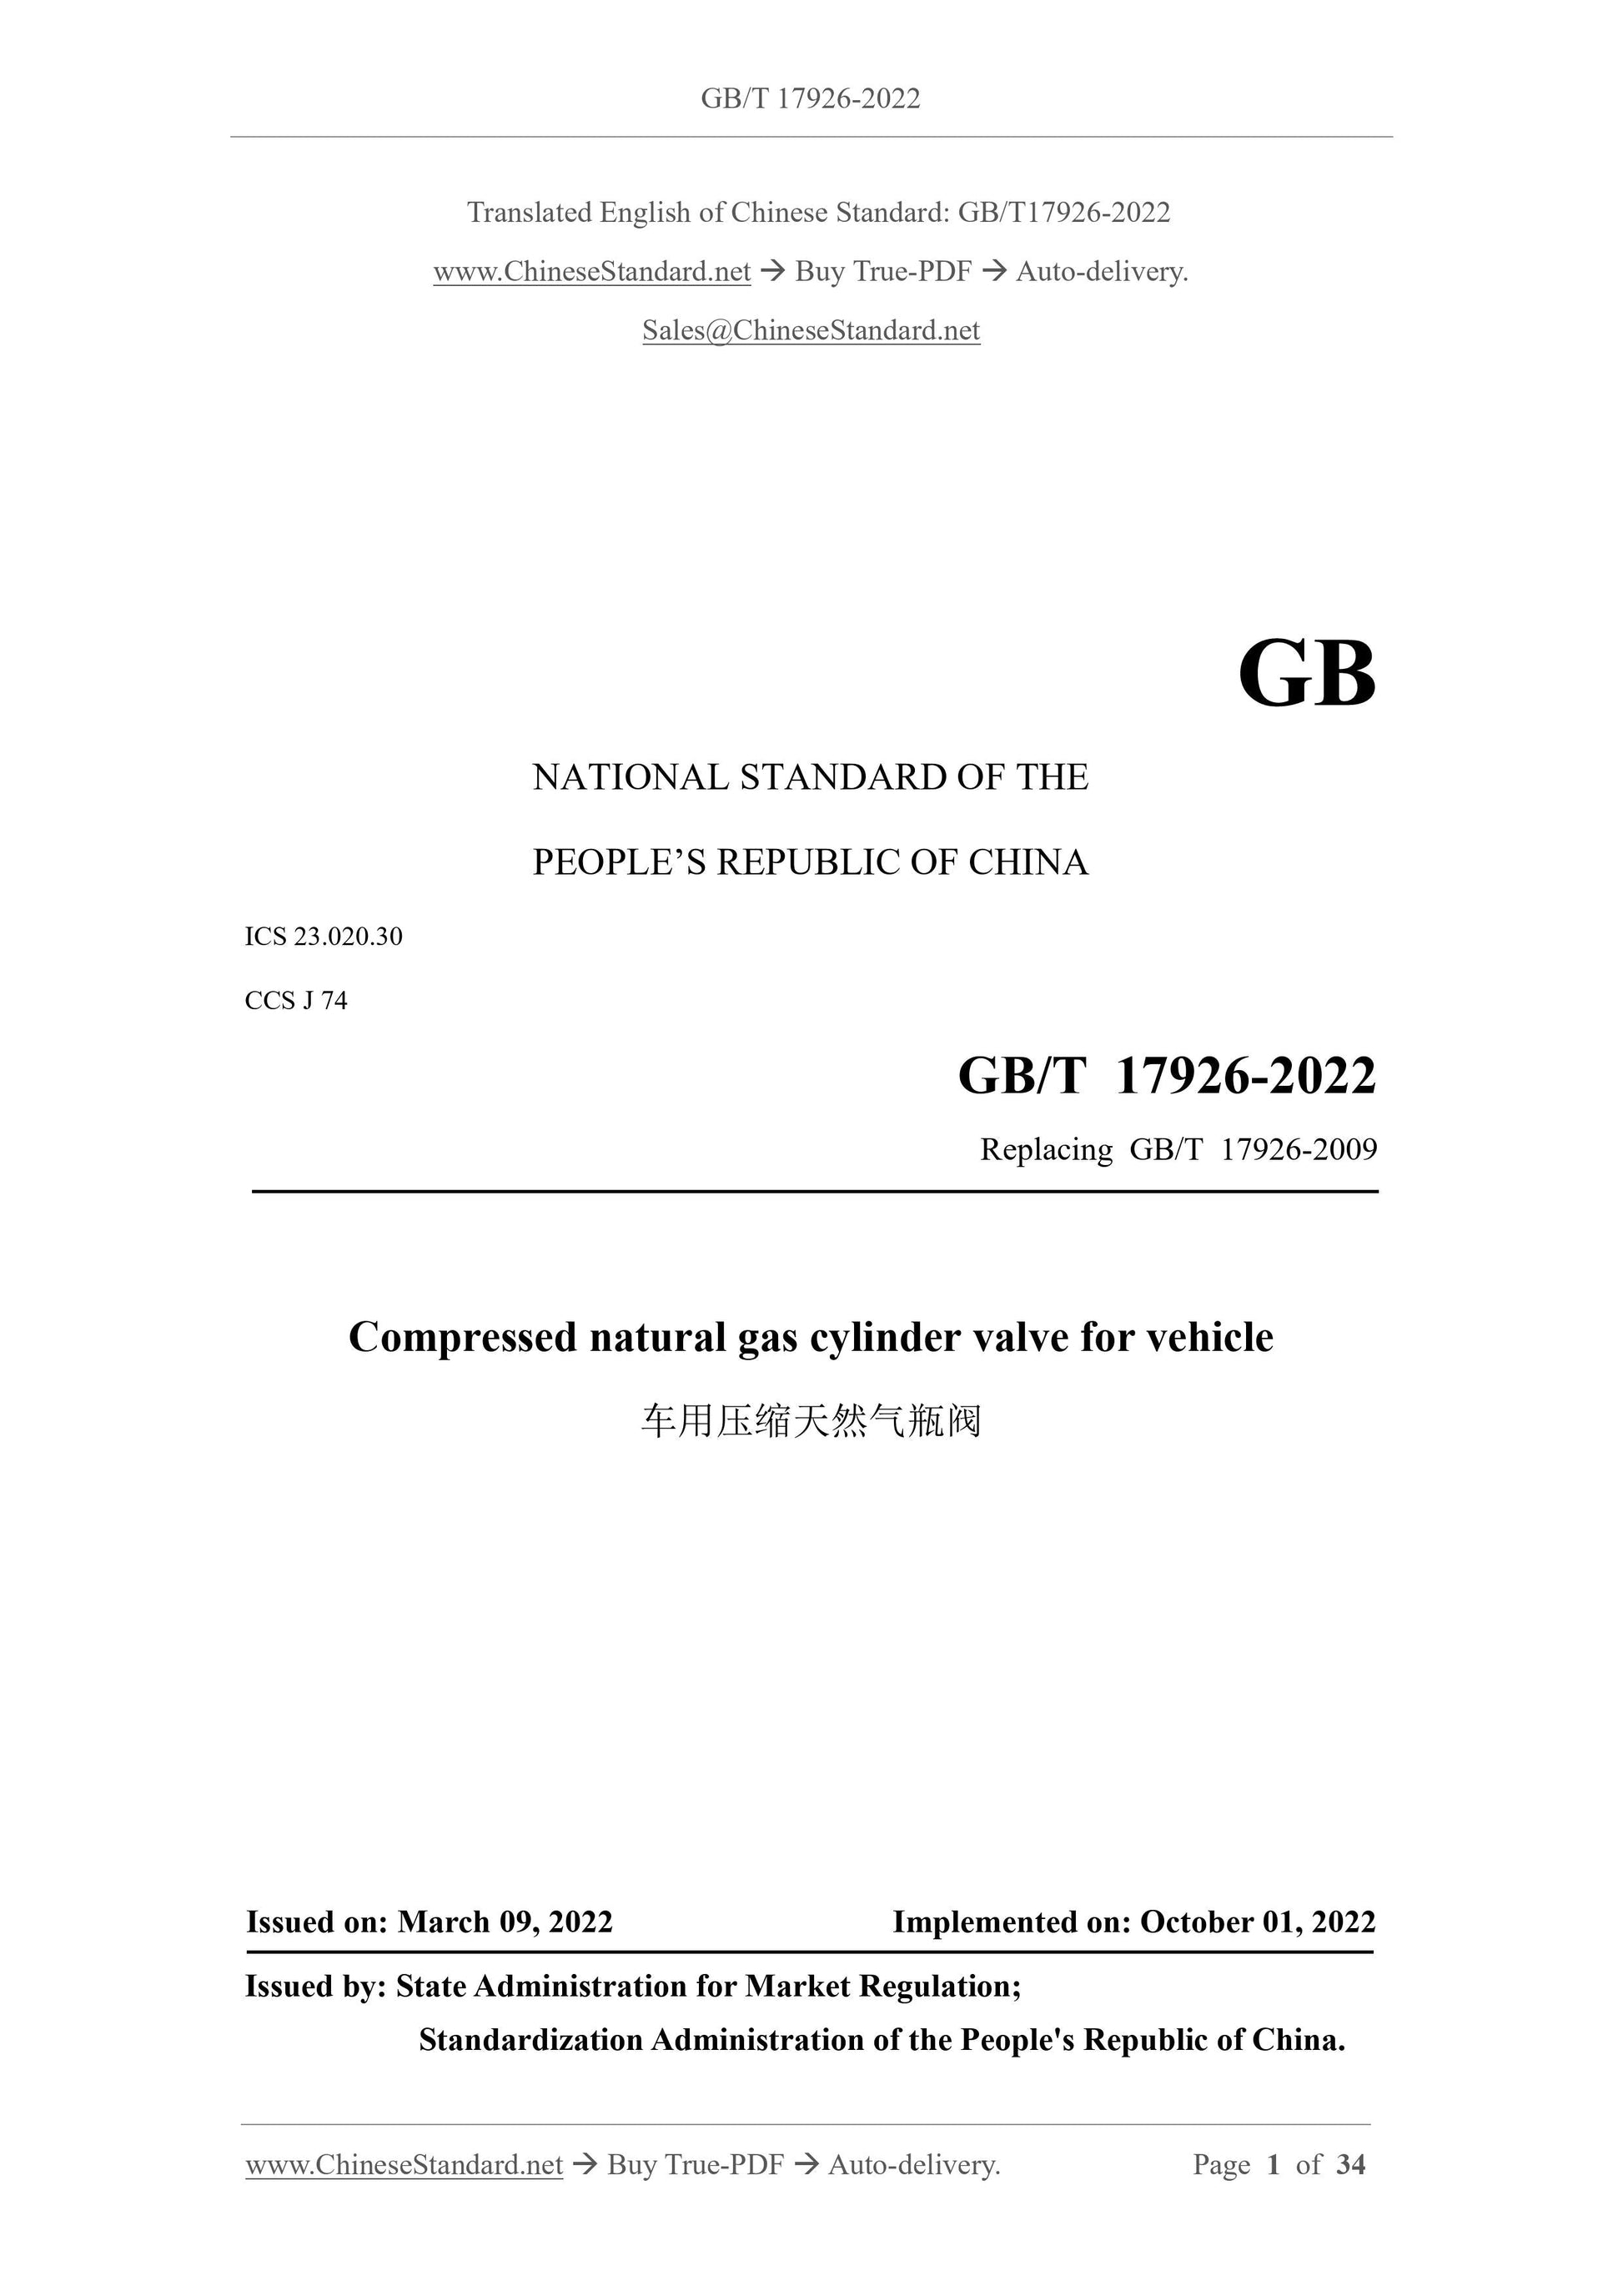 GB/T 17926-2022 Page 1